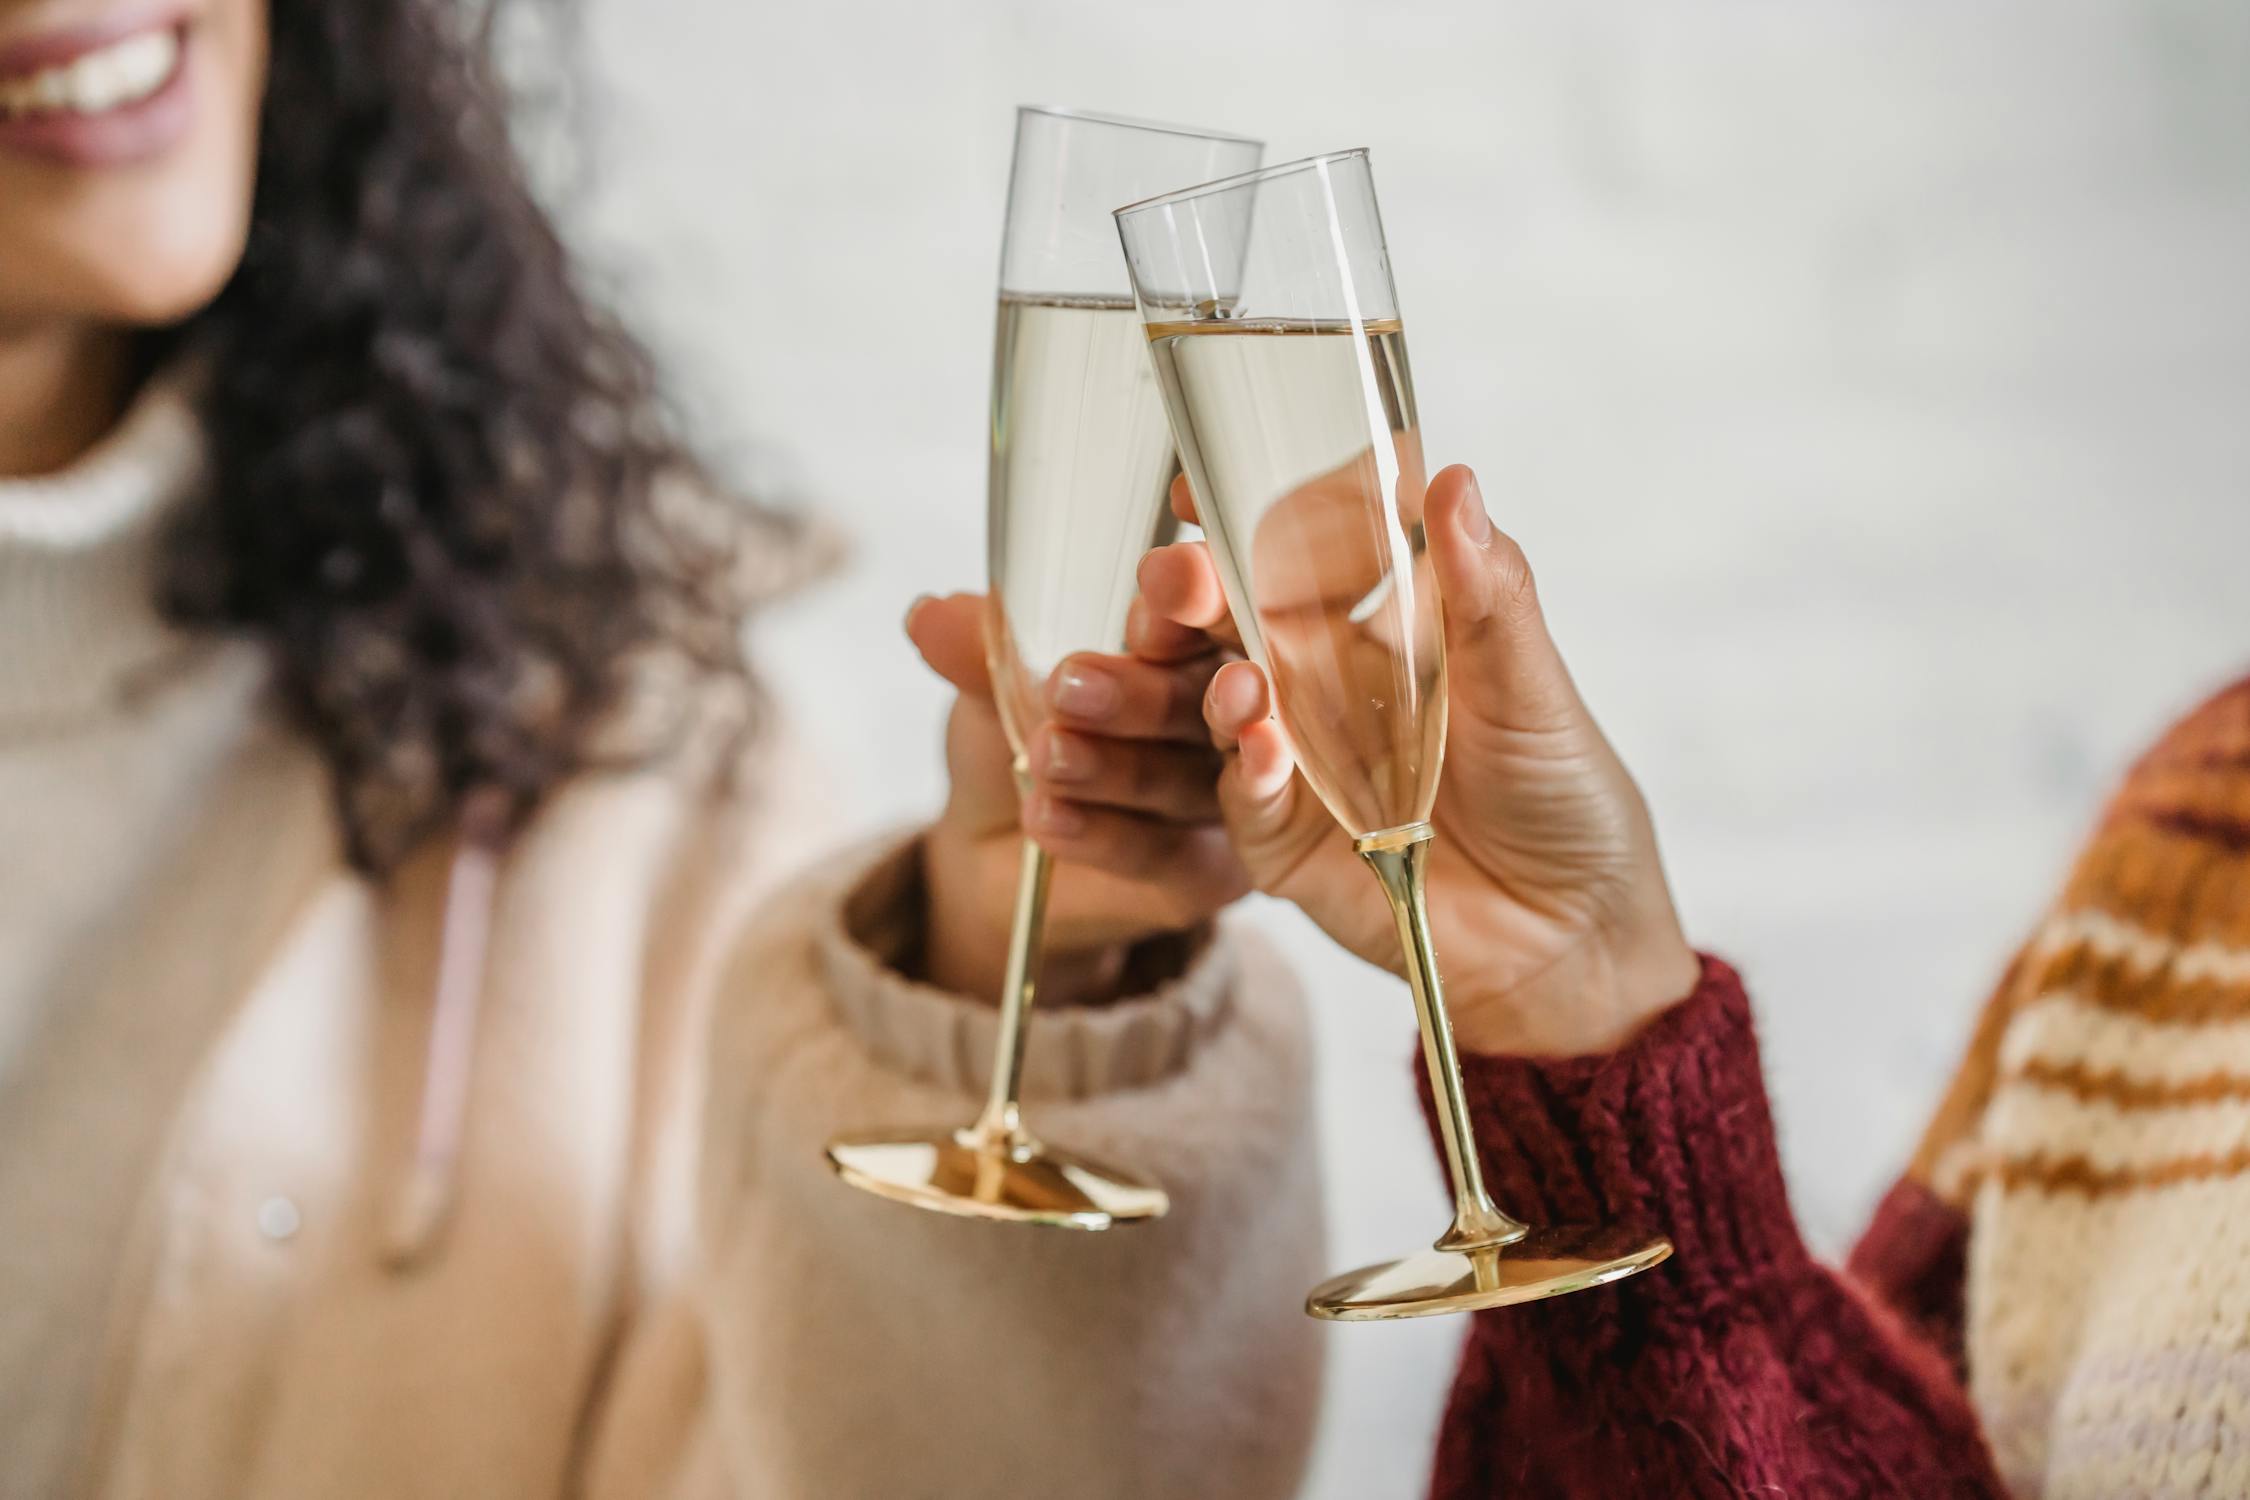 Friends Clinking Glass Of Champagne While Celebrating Occasion · Free